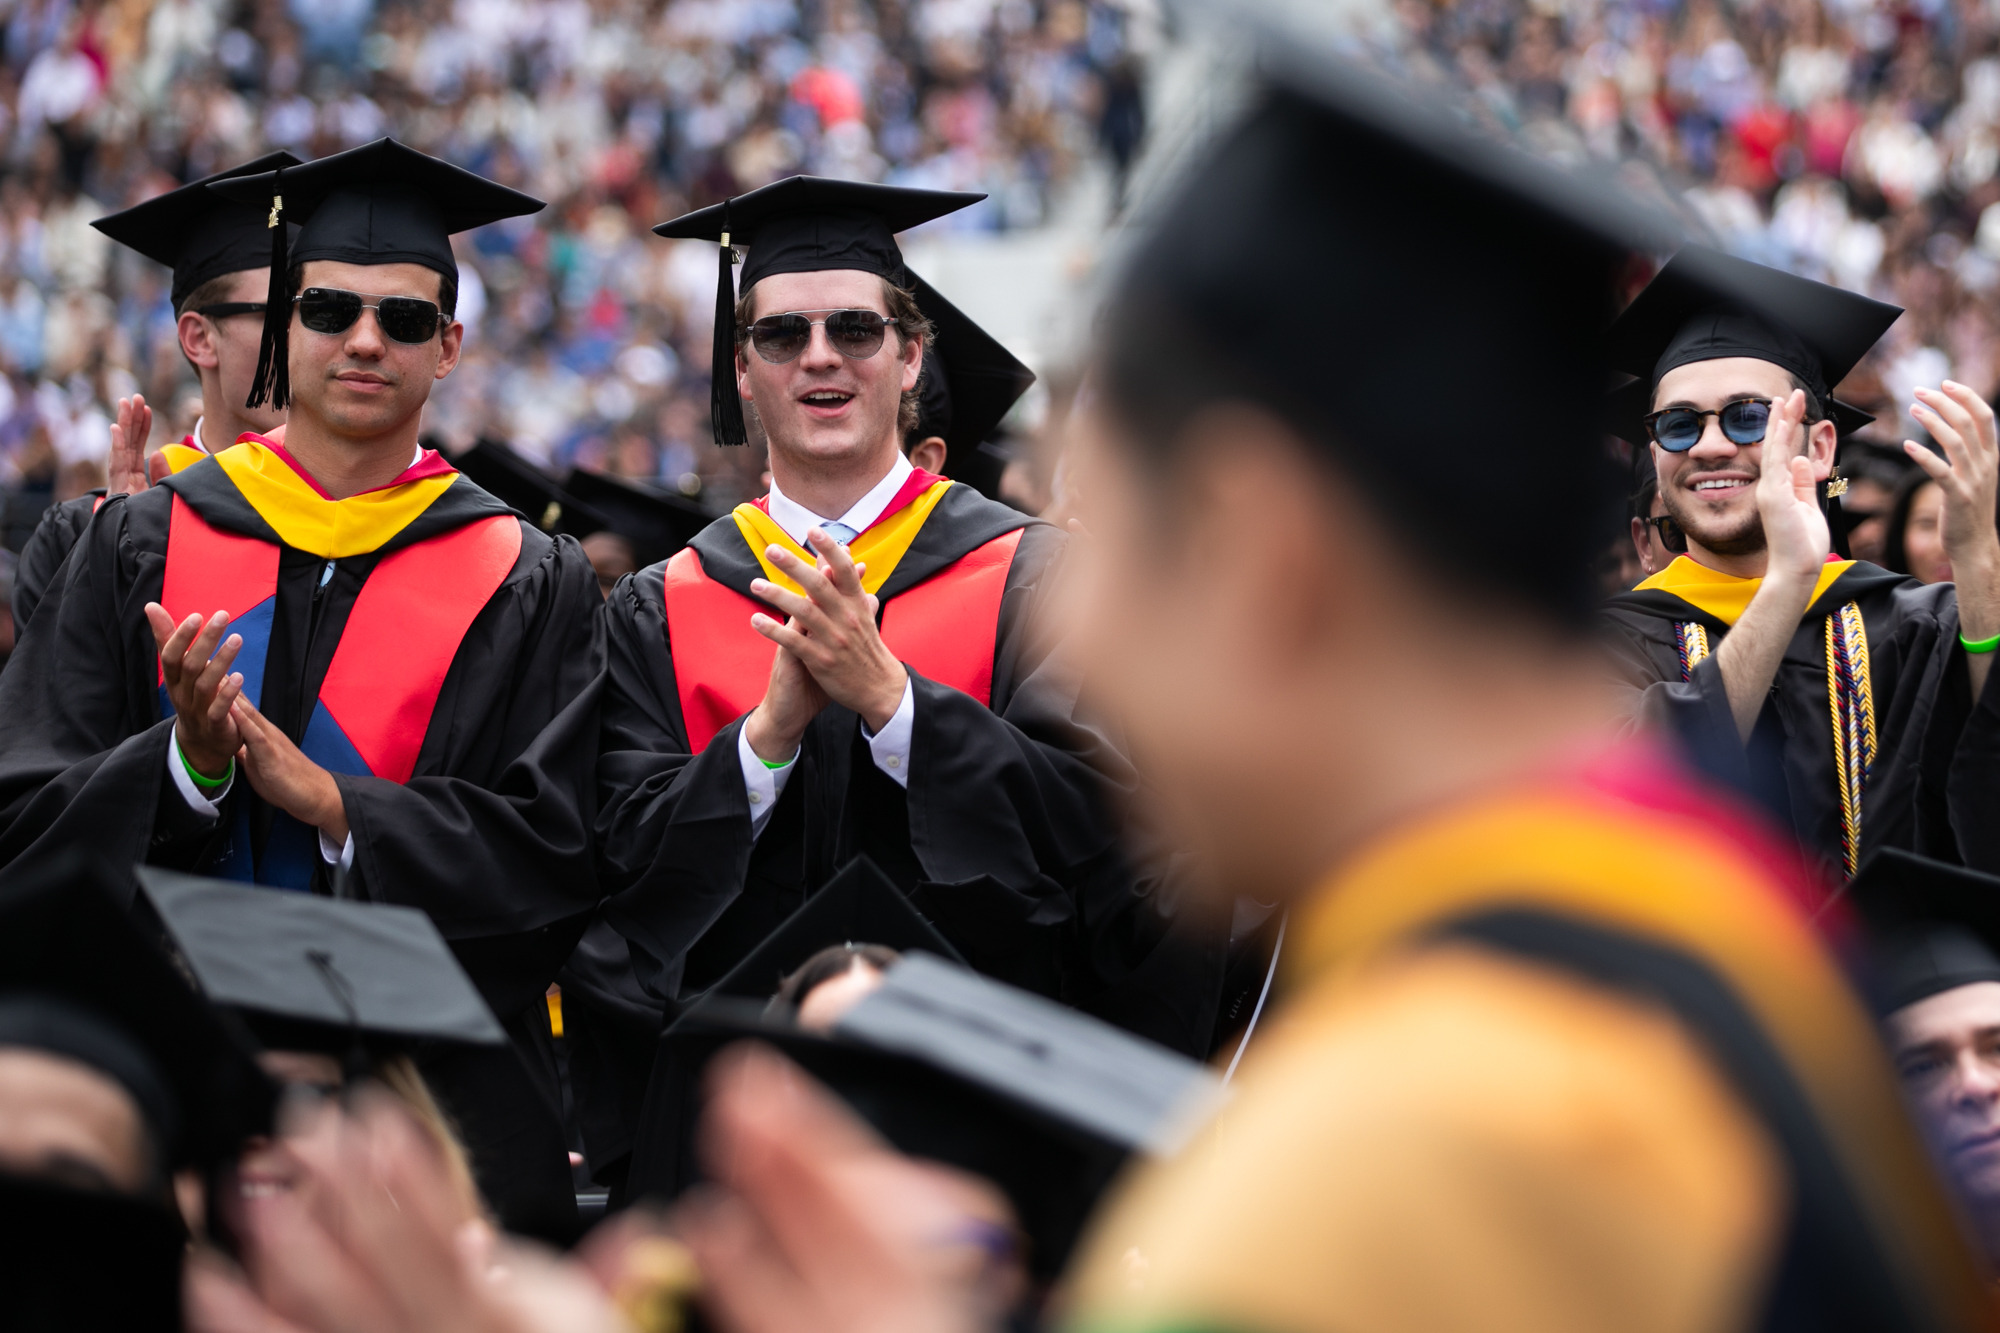 students clap during commencement ceremony